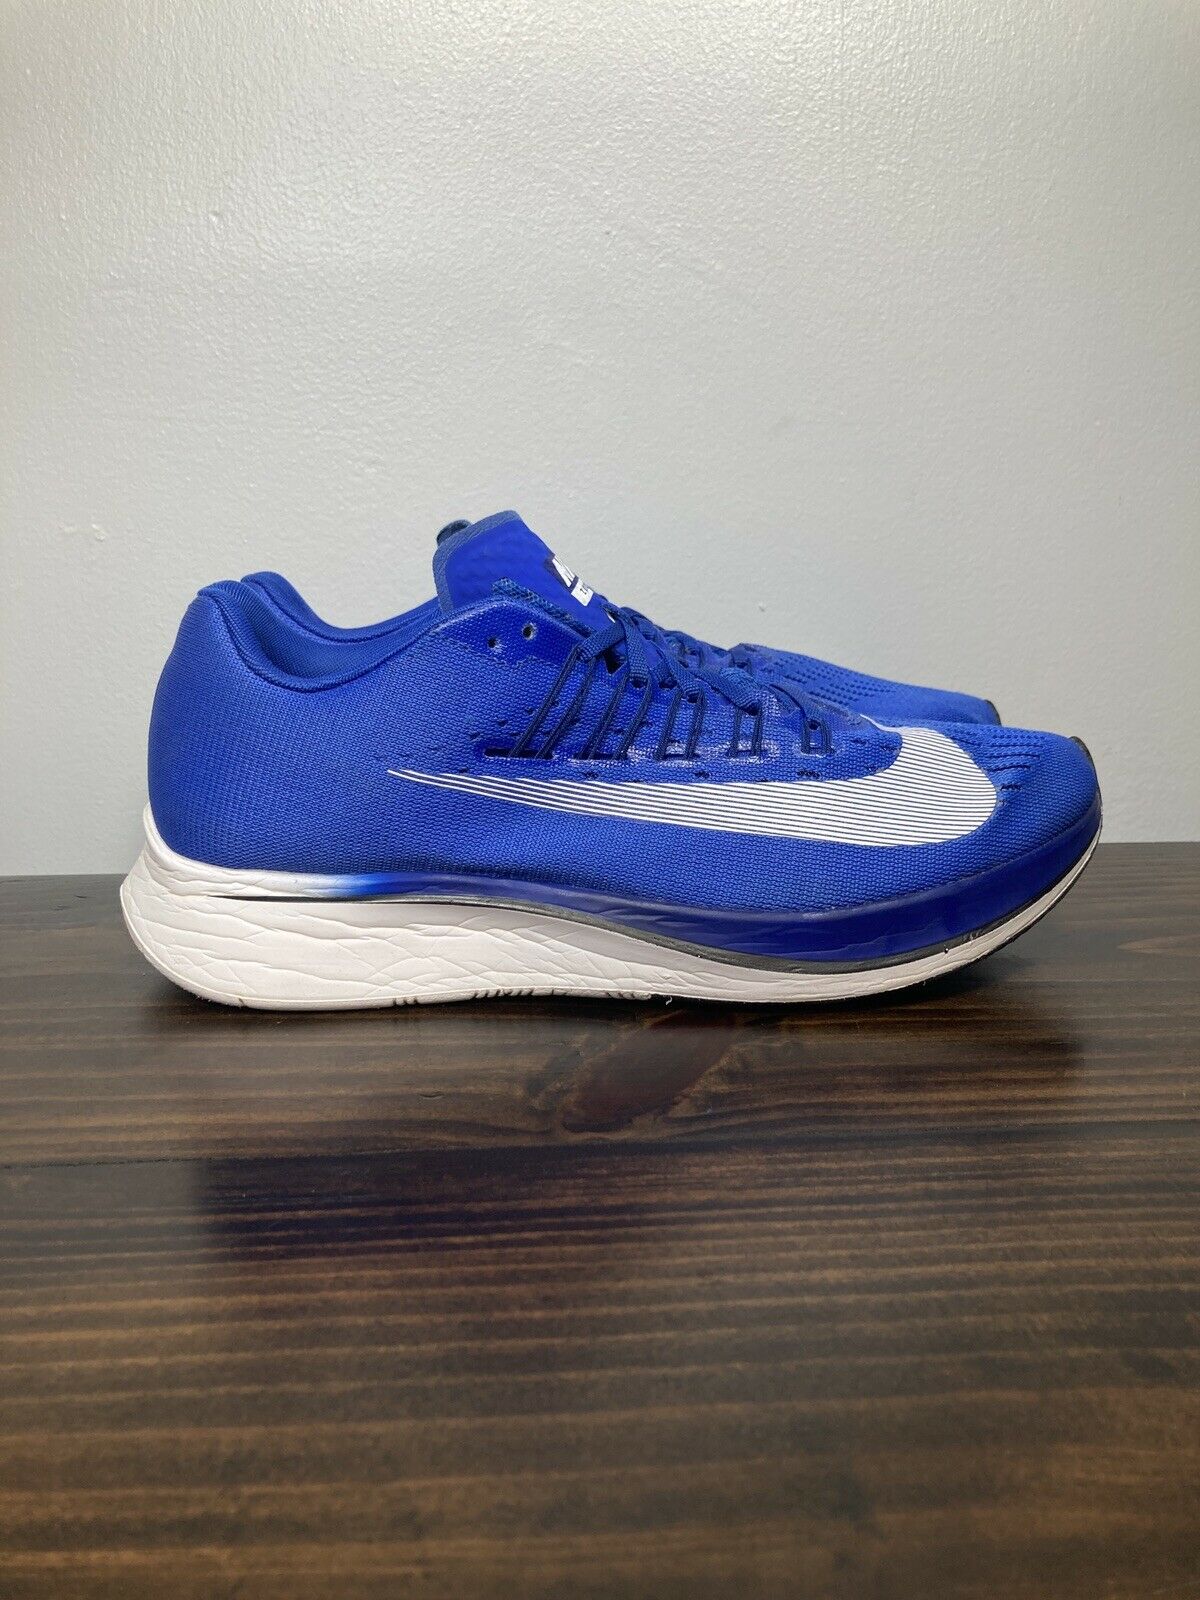 Nike Zoom Fly Racing 880848-411 Hyper Royal Blue Running Shoes US Size 9